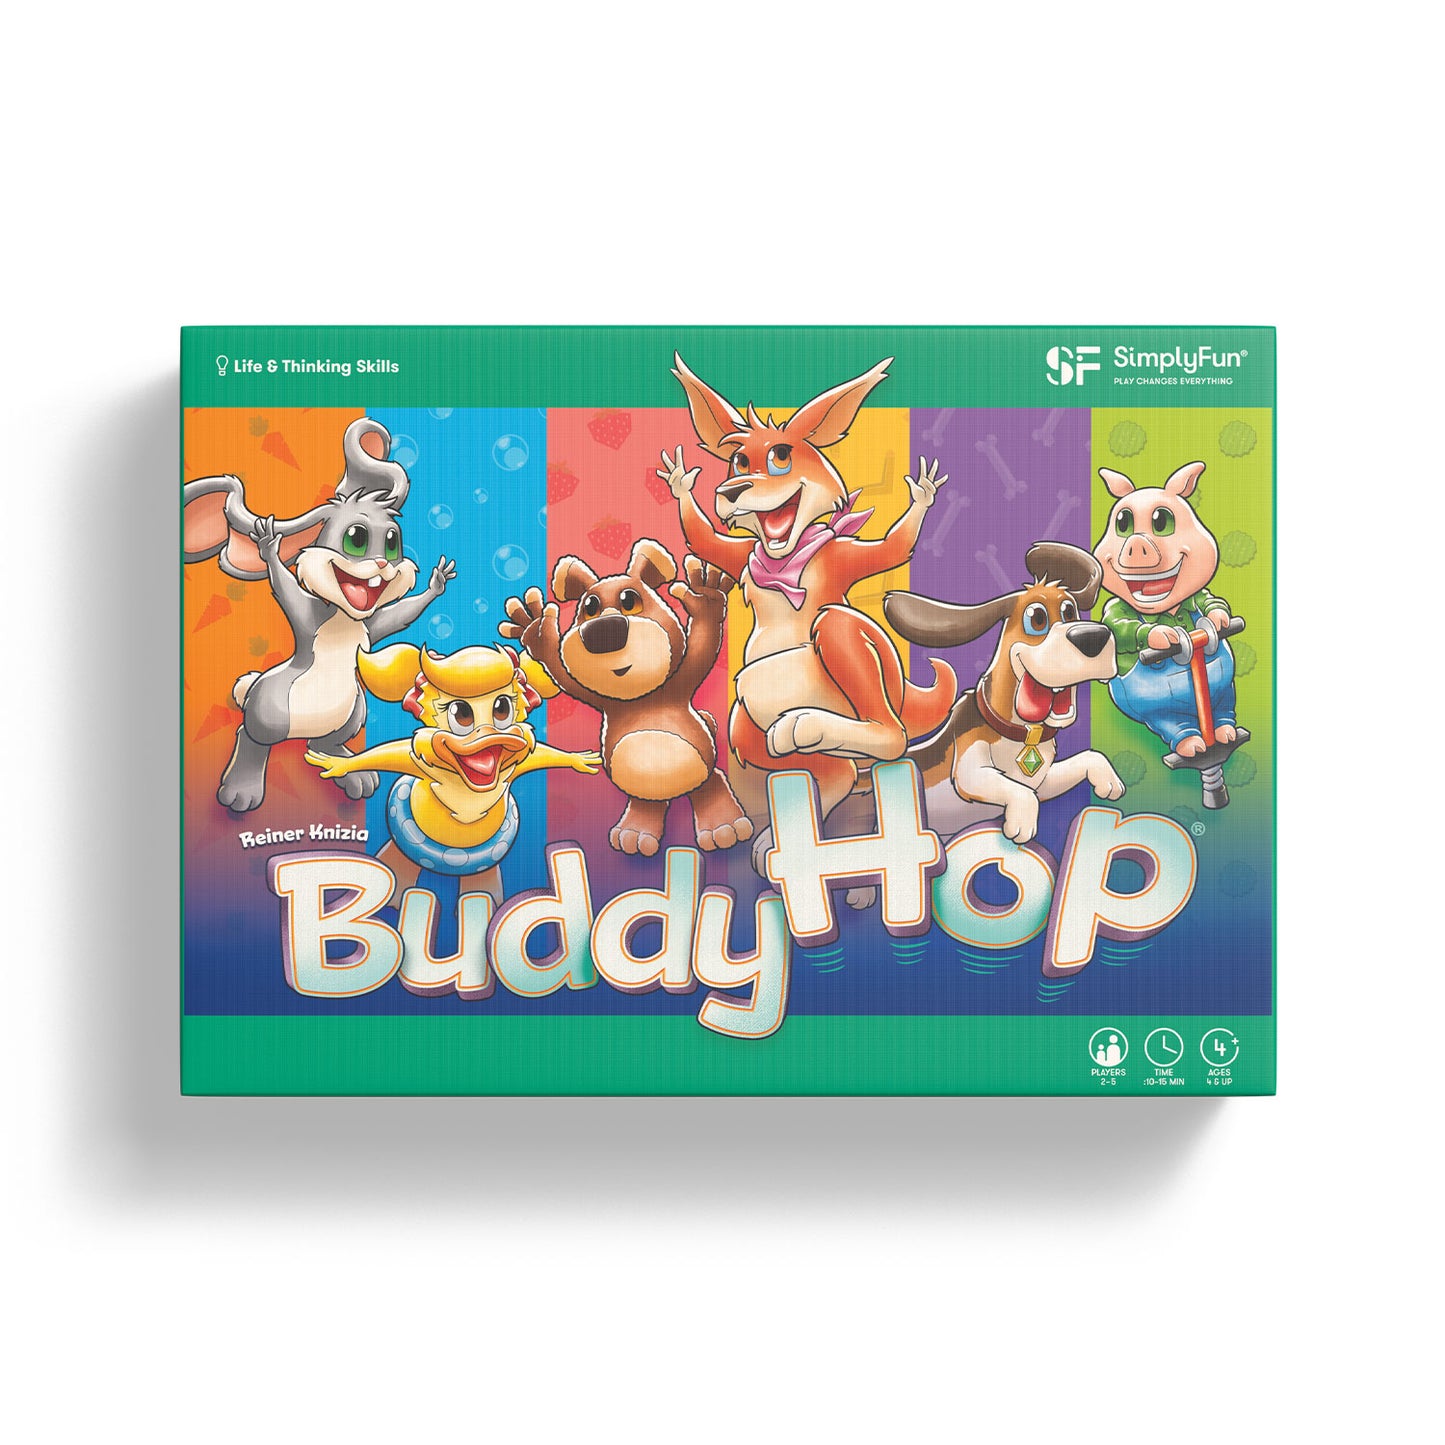 Buddy Hop by SimplyFun is a fun memory and gross motor skills game for ages 4 and up